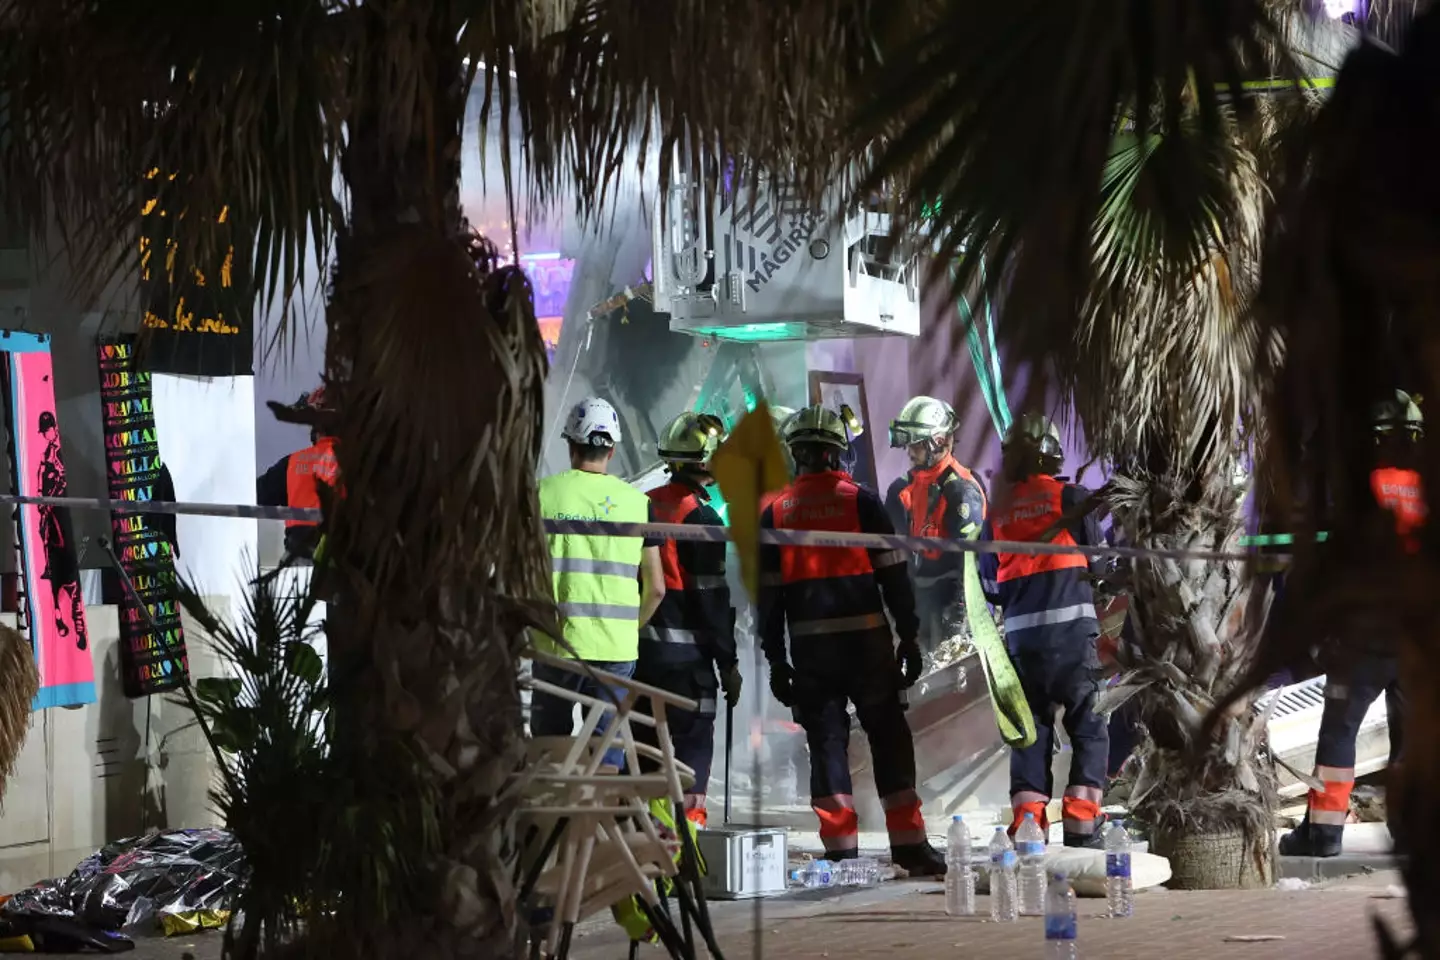 Four people have died in the Majorca building collapse. (Europa Press News / Contributor / Getty Images)